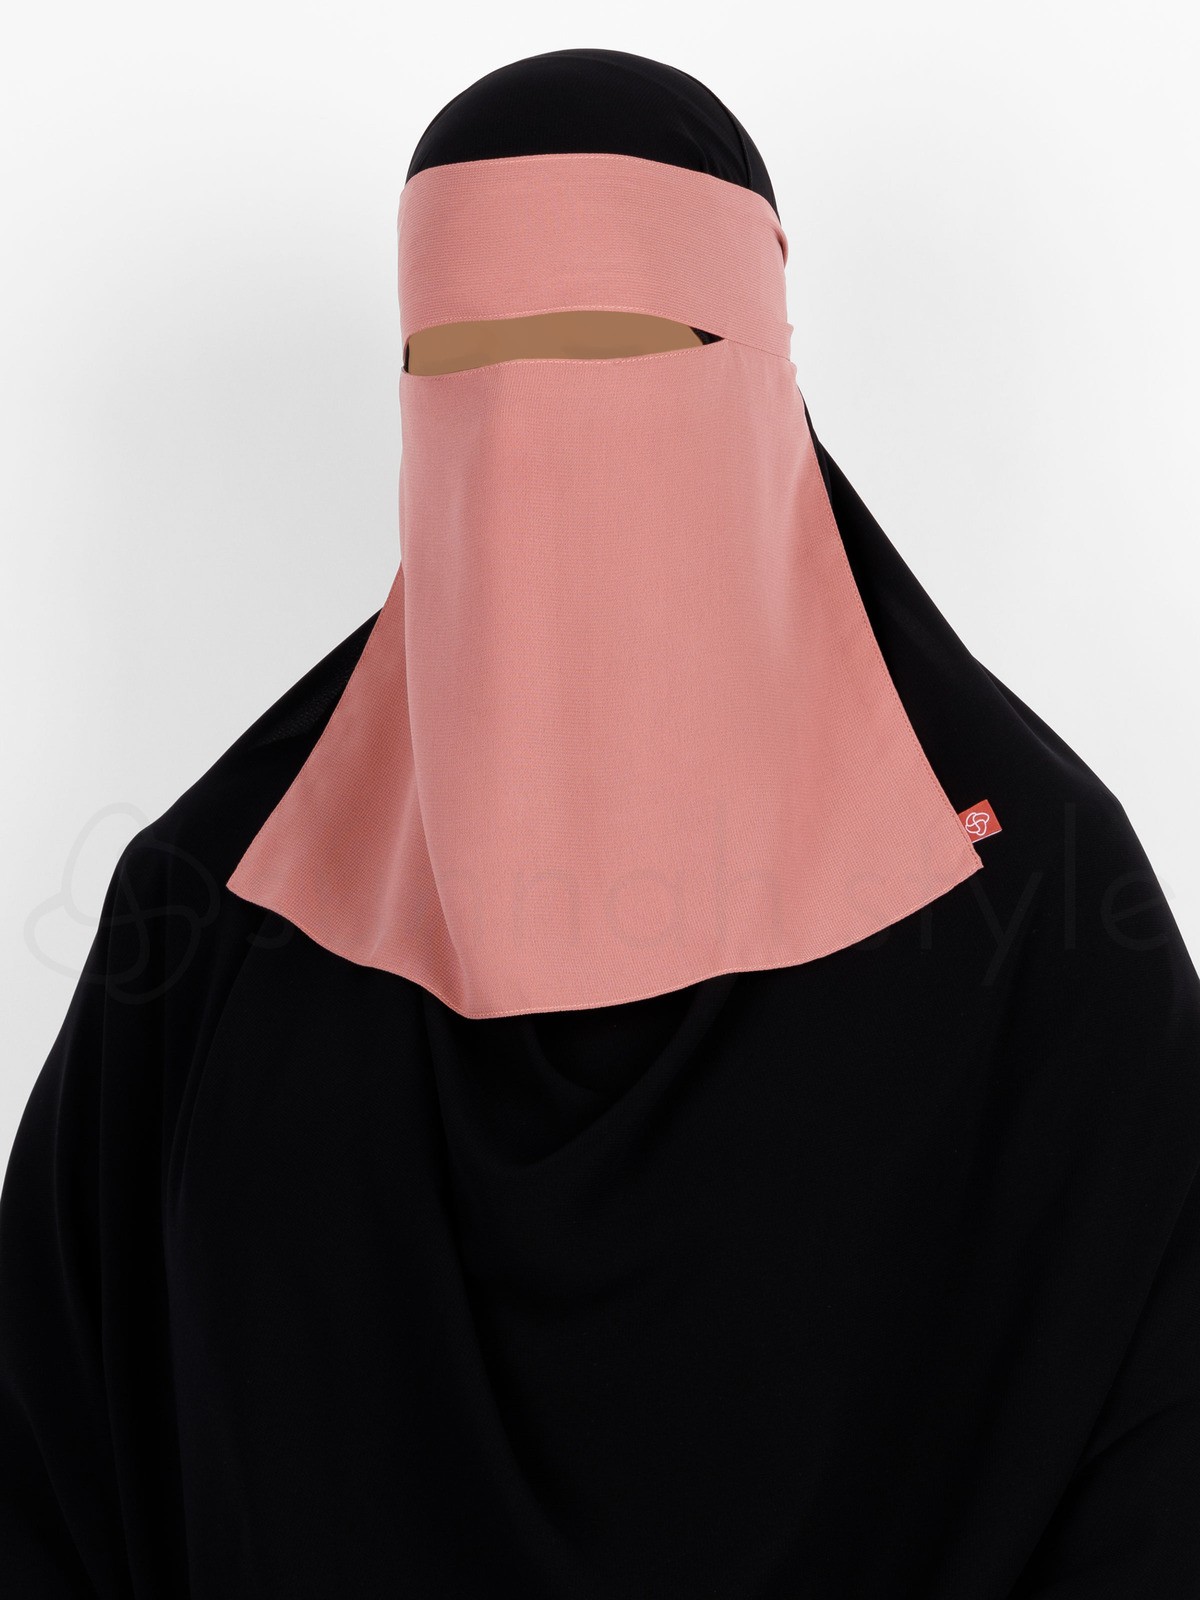 Sunnah Style - Short One Layer Niqab (Coral)